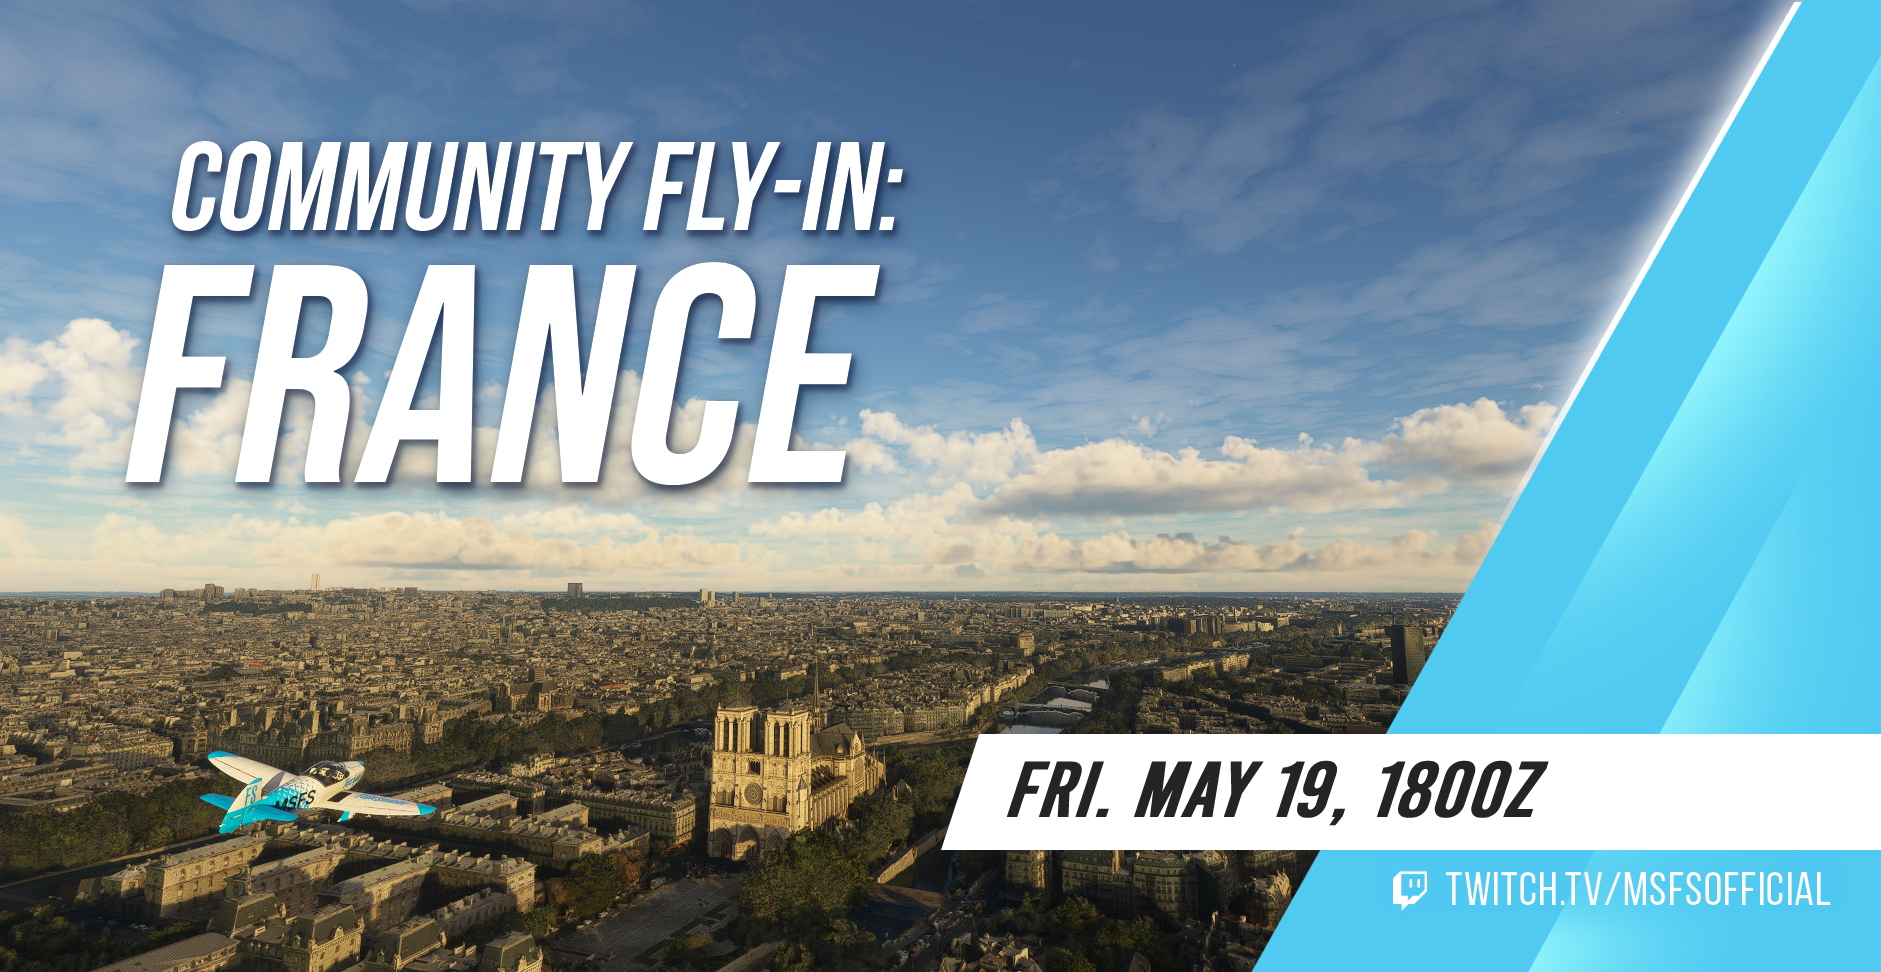 A Robin Cap10 flies towards Notre Dame Cathedral. Community Fly-In: France. Taking place on Friday May 19th at 1800Z, join us at Twitch.tv/msfsofficial